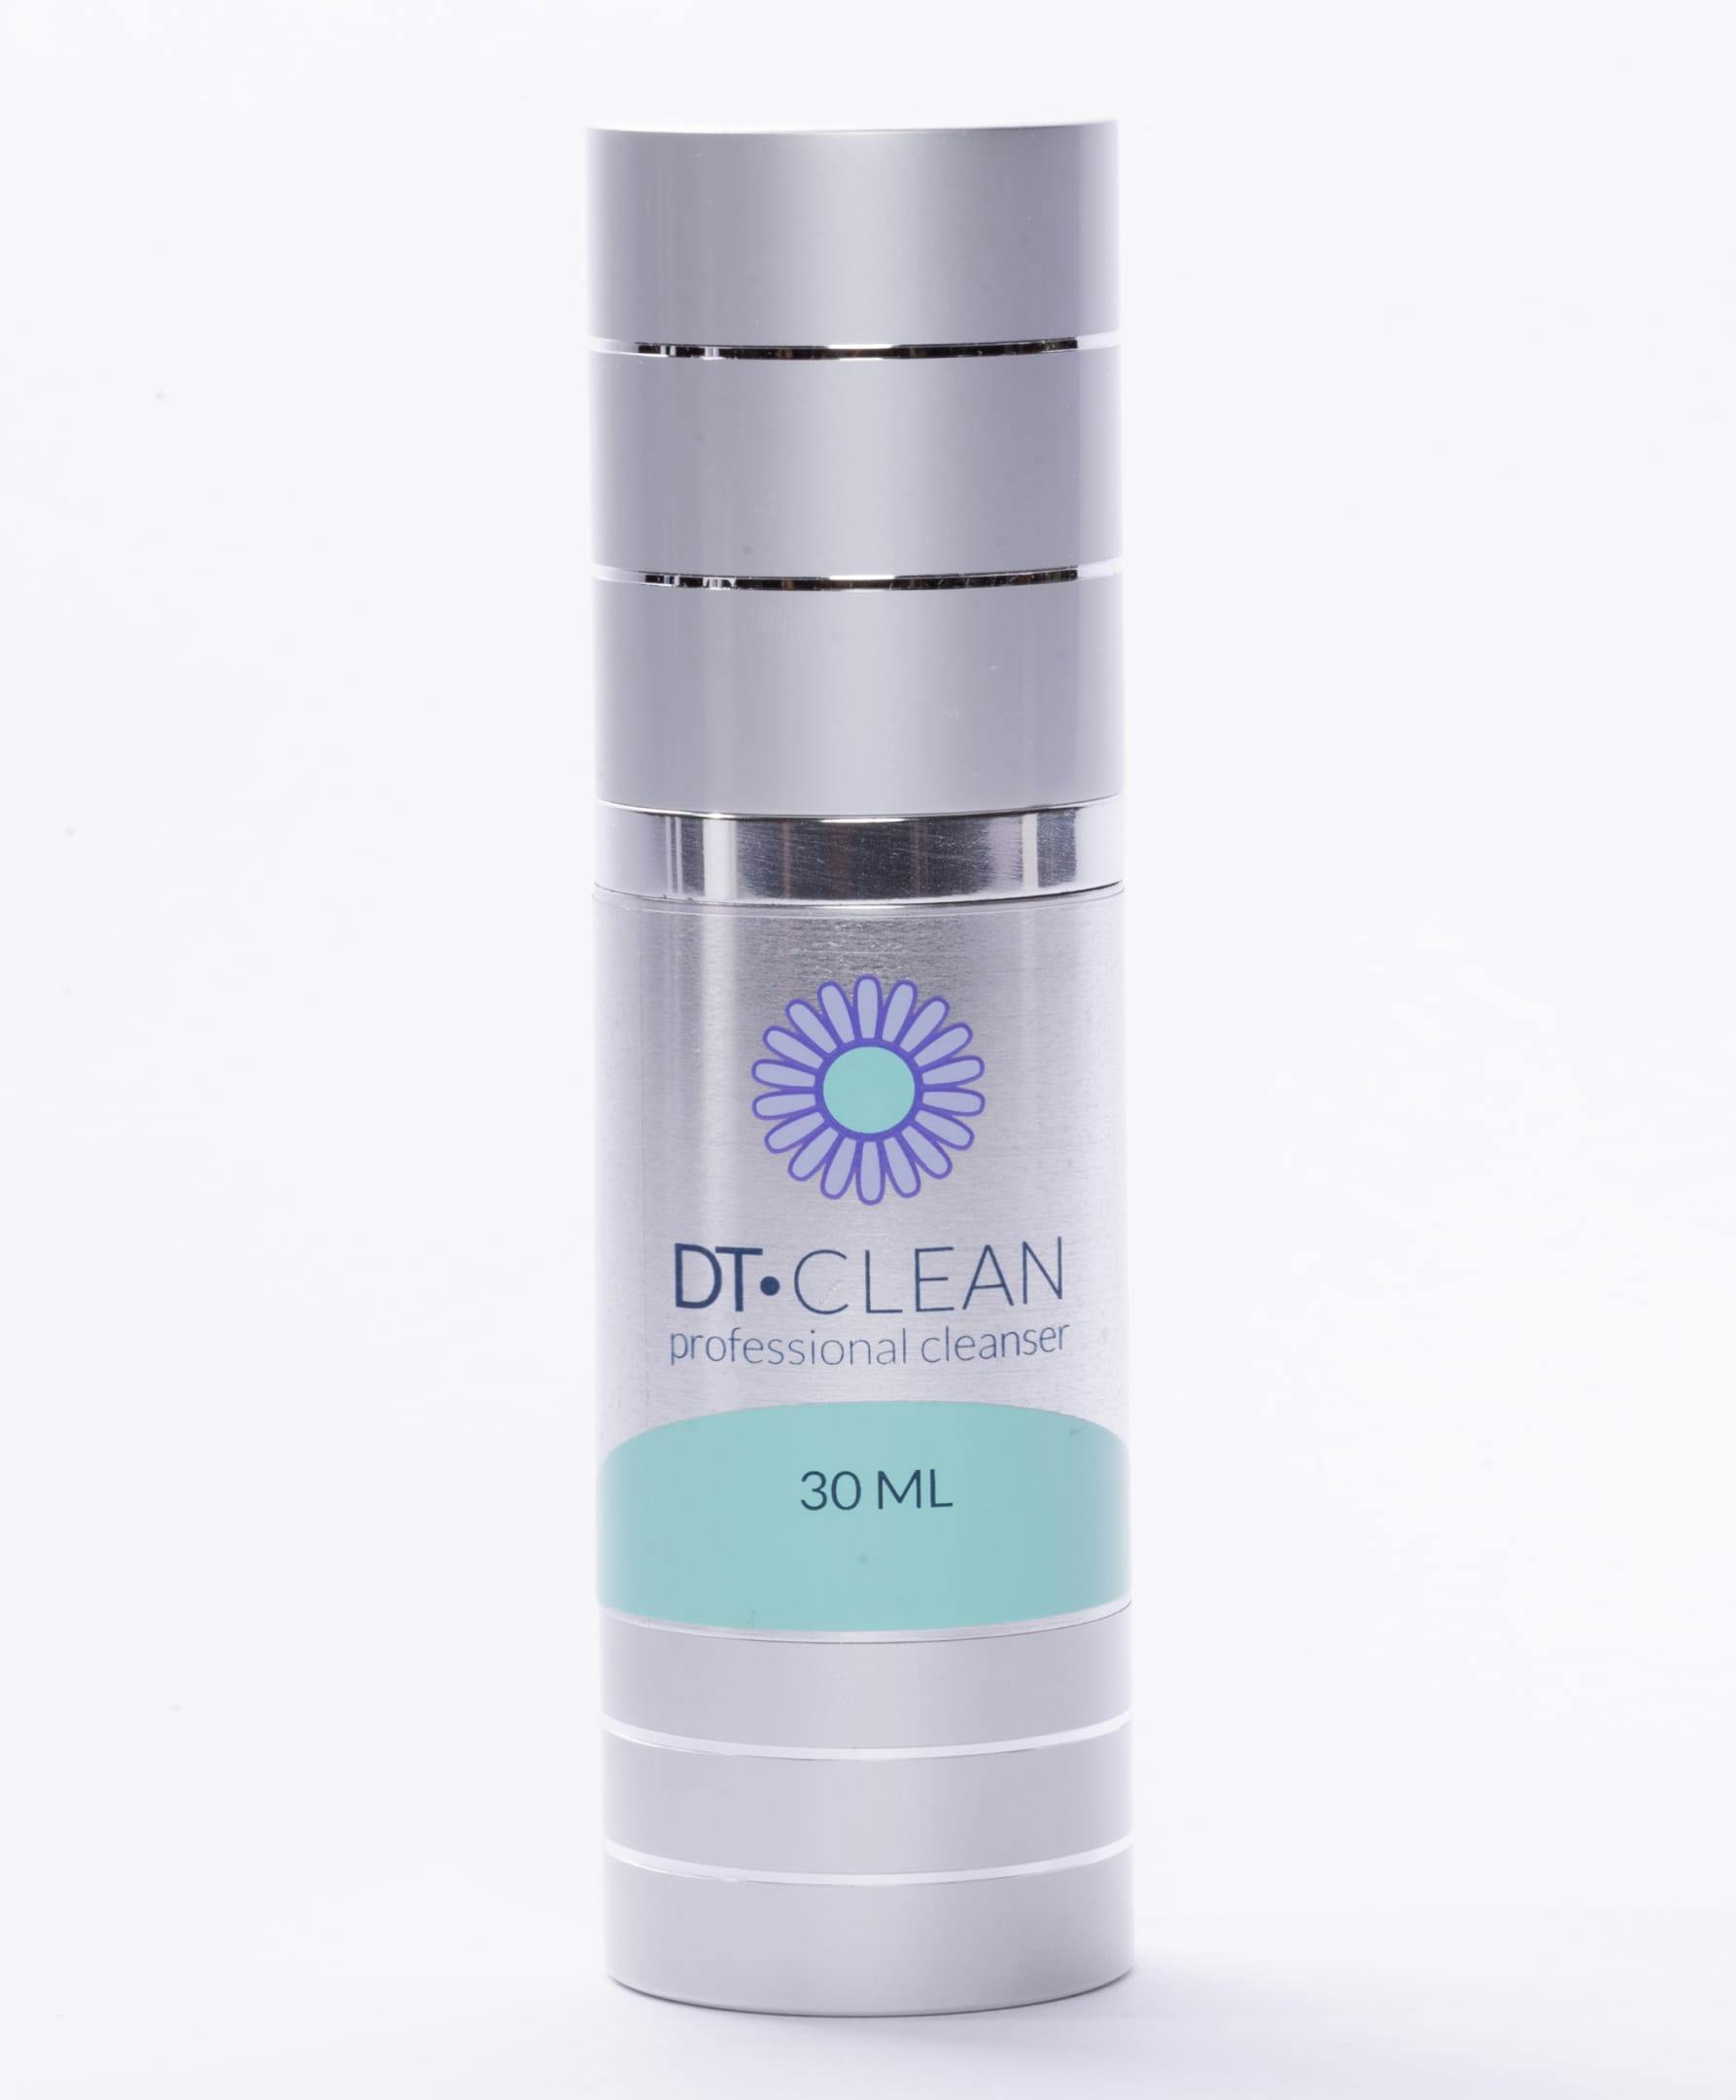 DT Clean Professional Cleanser